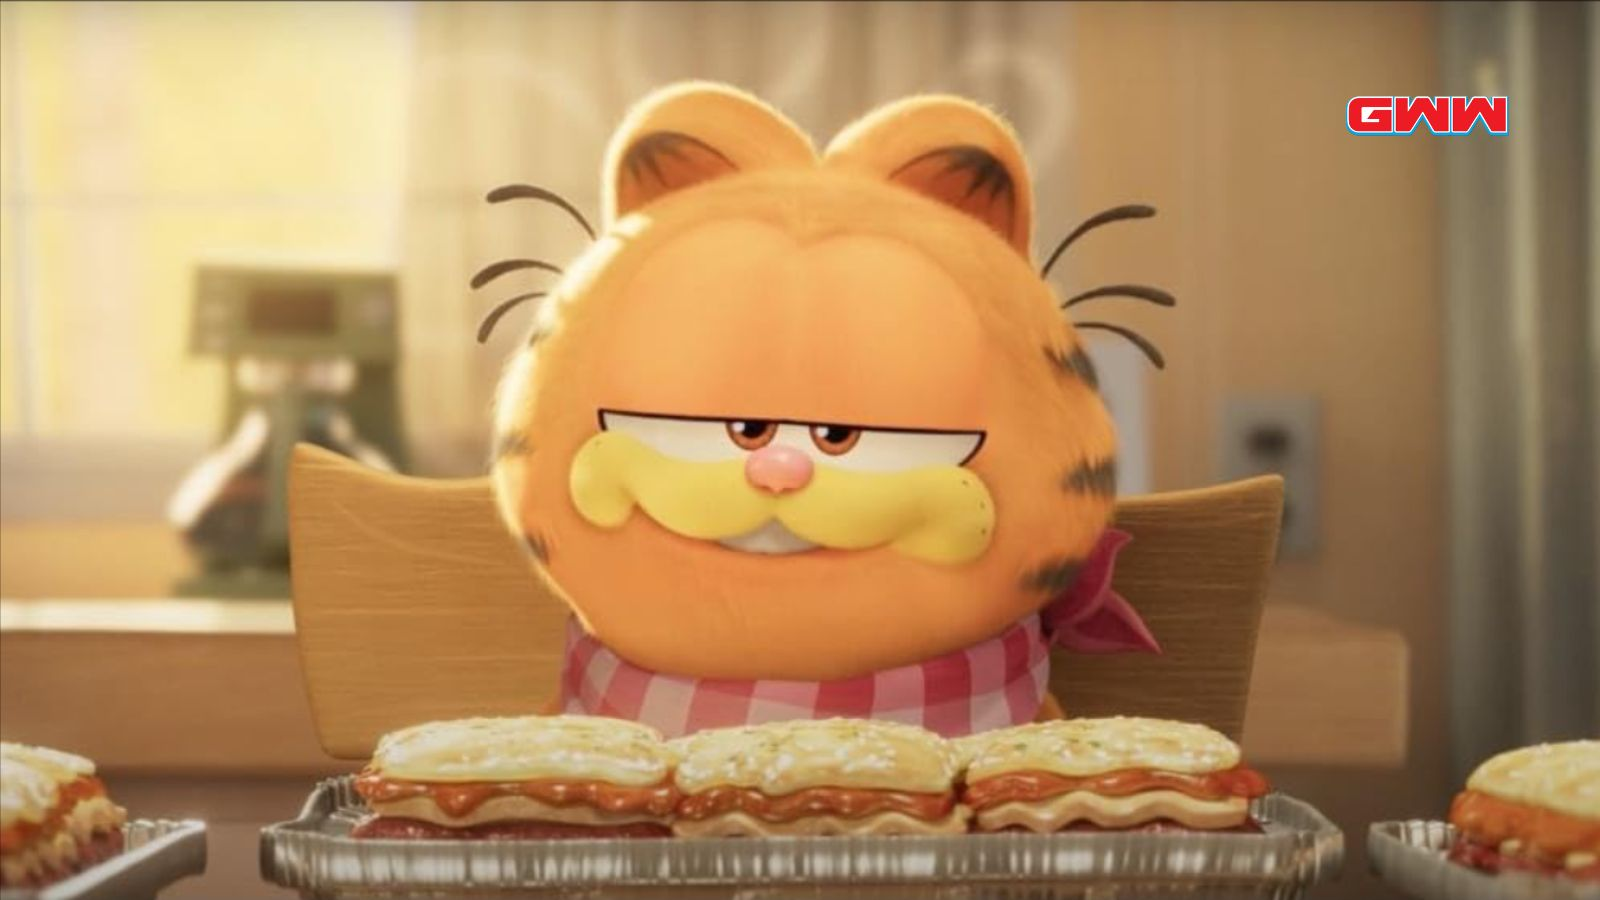 Garfield eating lasagna on a table, The Garfield Movie trailer